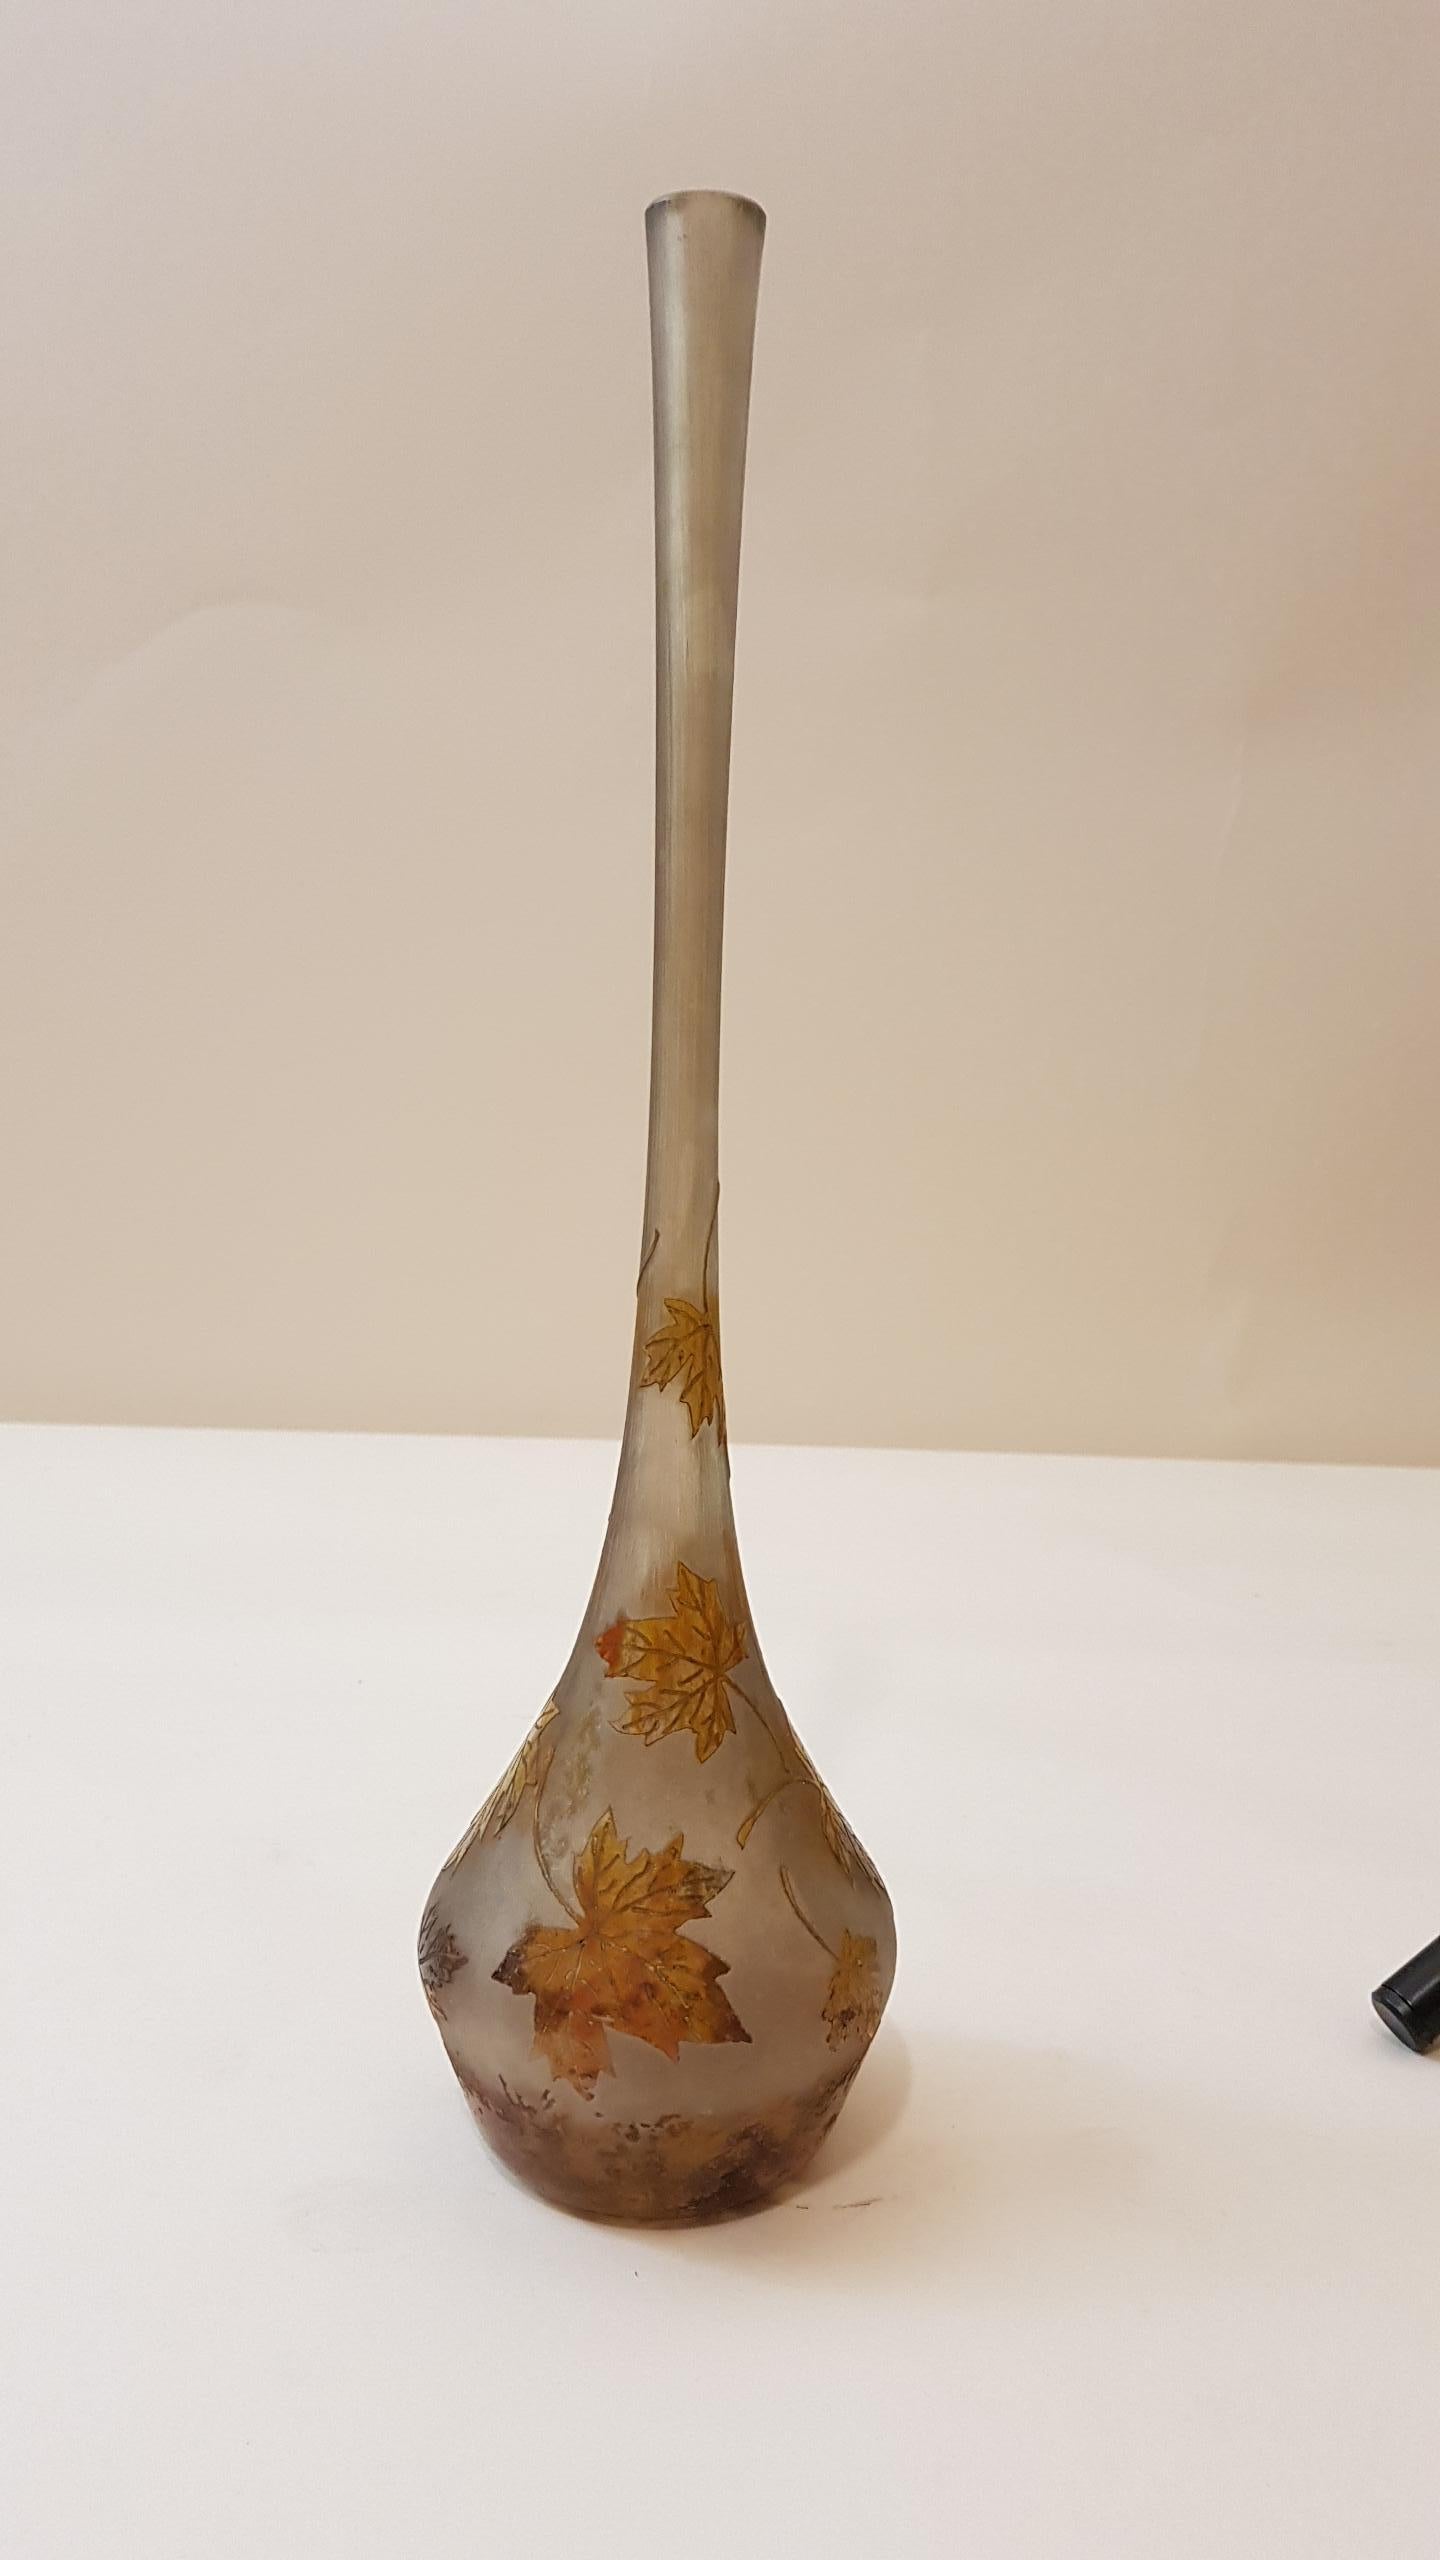 Soliflore vase with maple decoration
Signed Gallé.